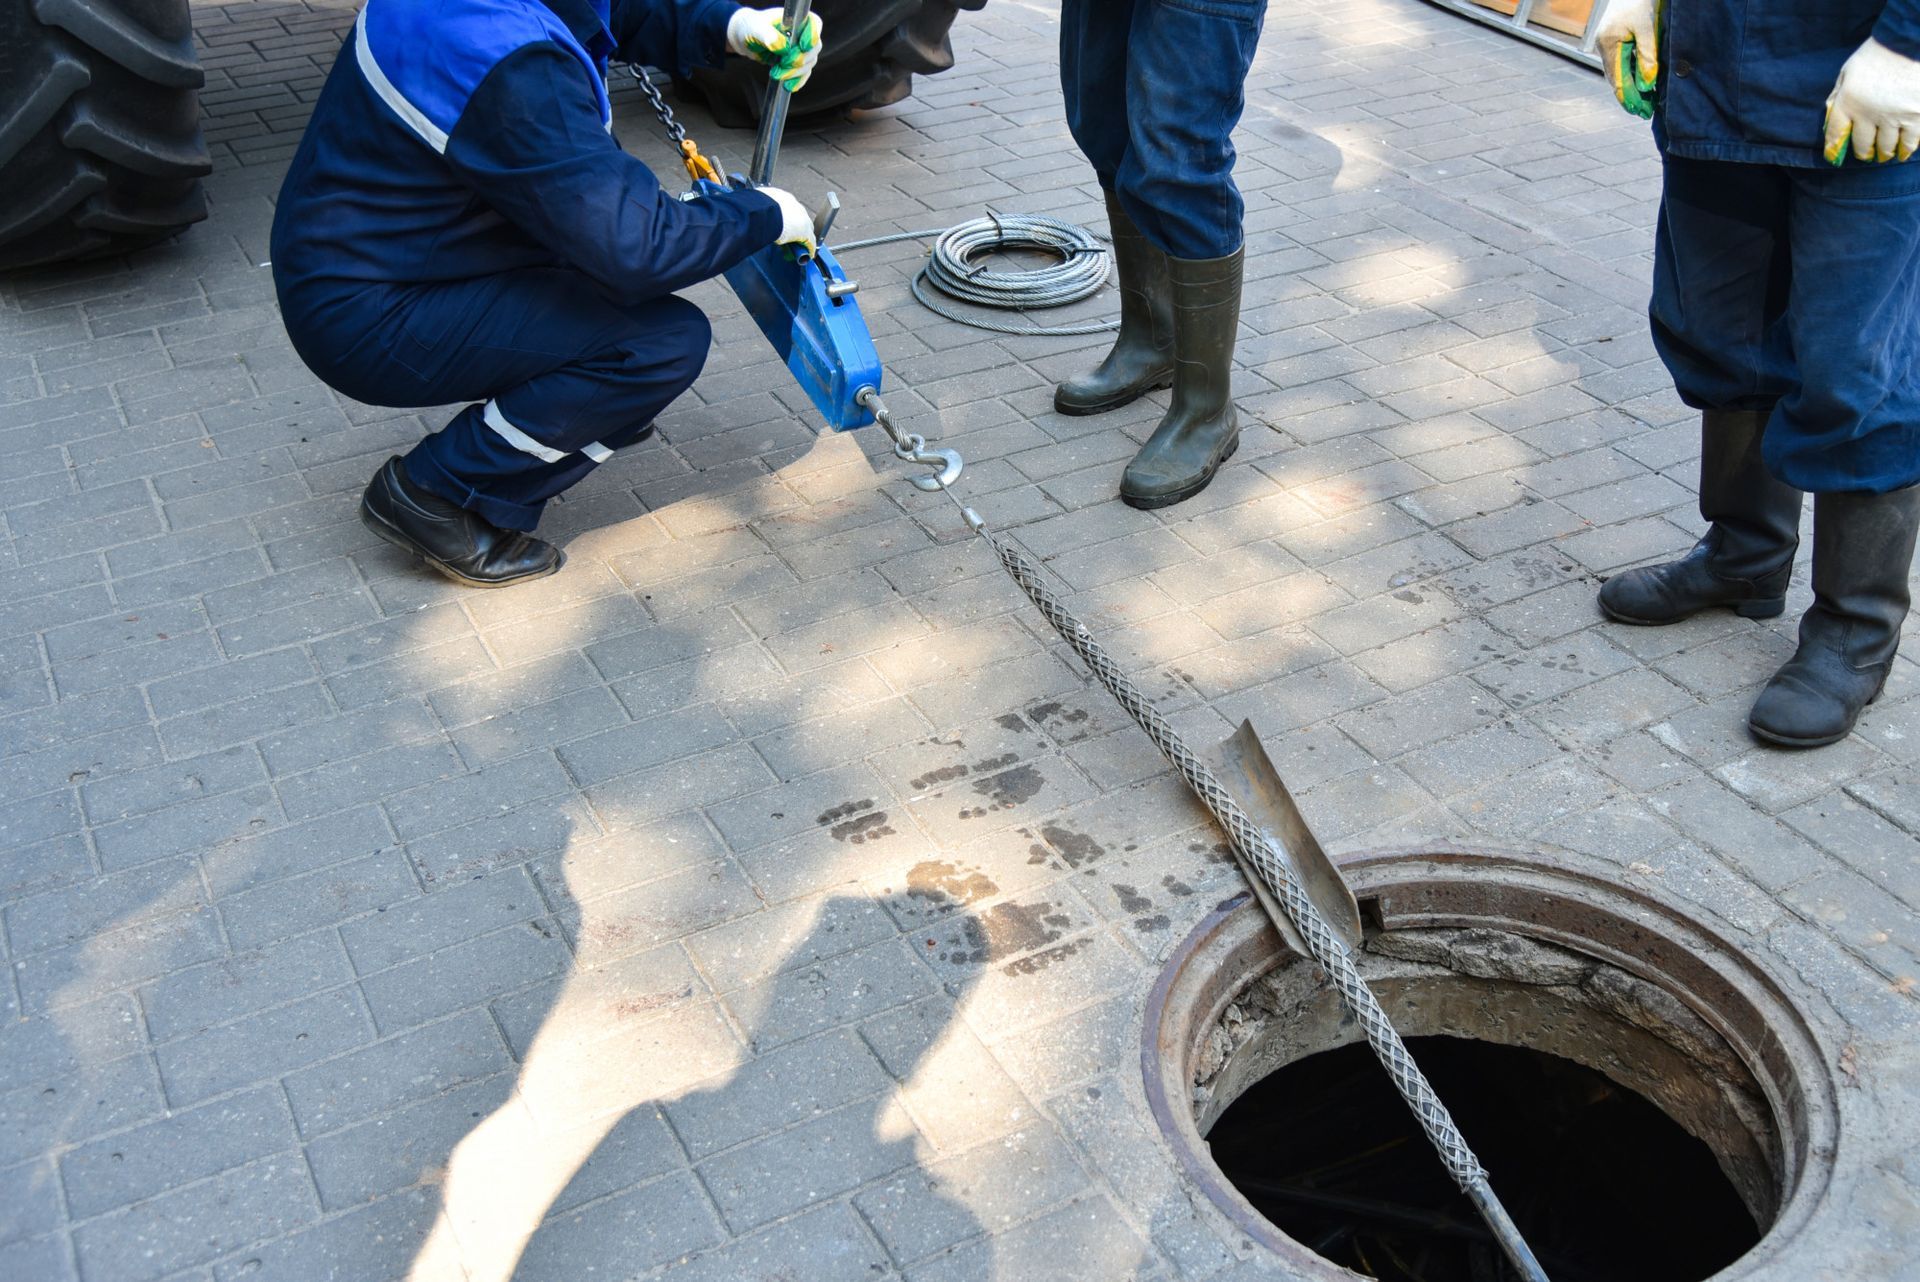 A group of men are working on a manhole cover.